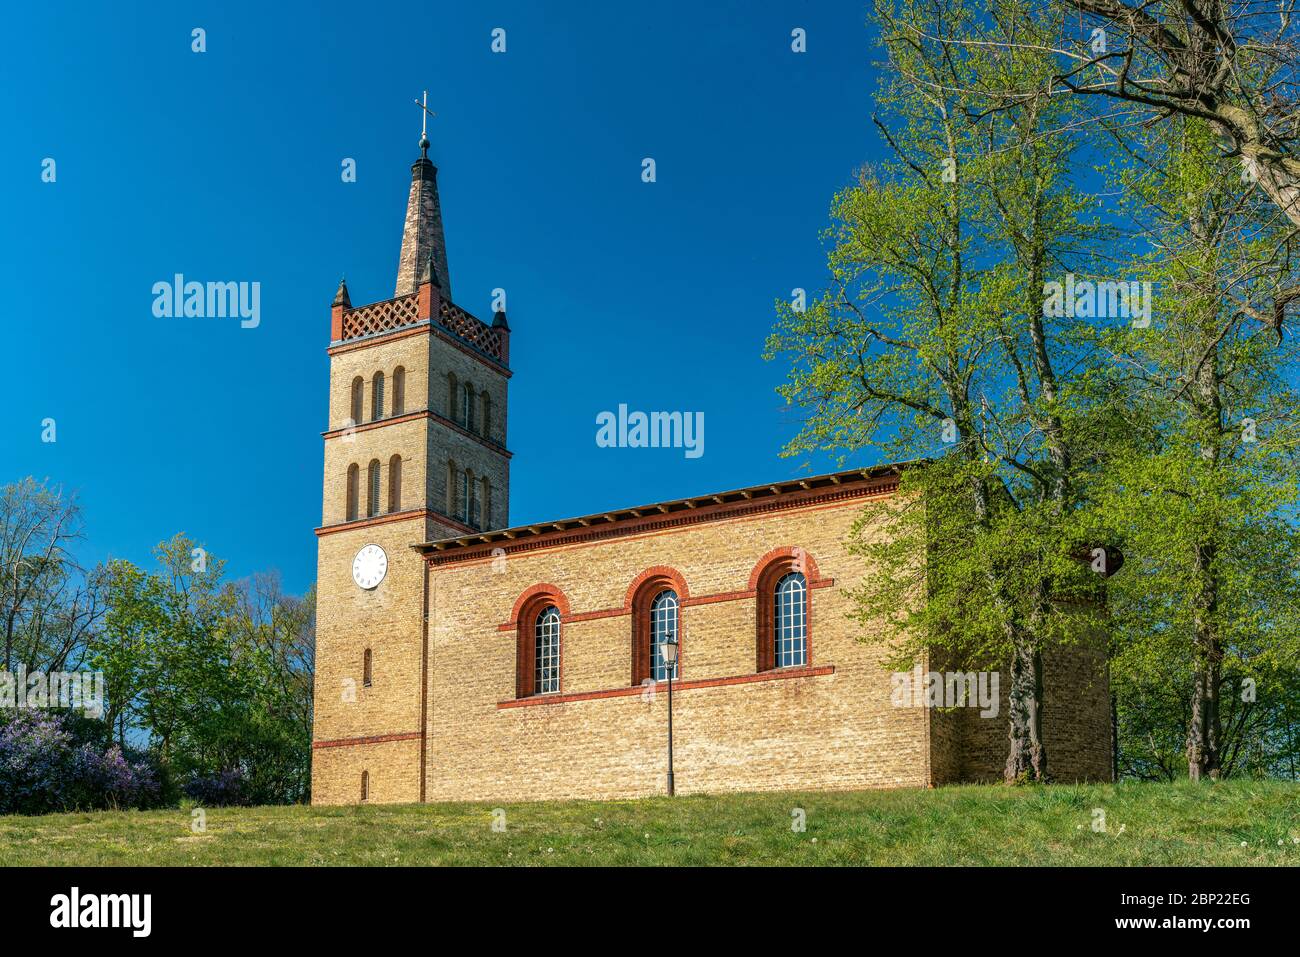 The historical village church in Petzow, Brandenburg, Germany on a bright sunny spring day Stock Photo